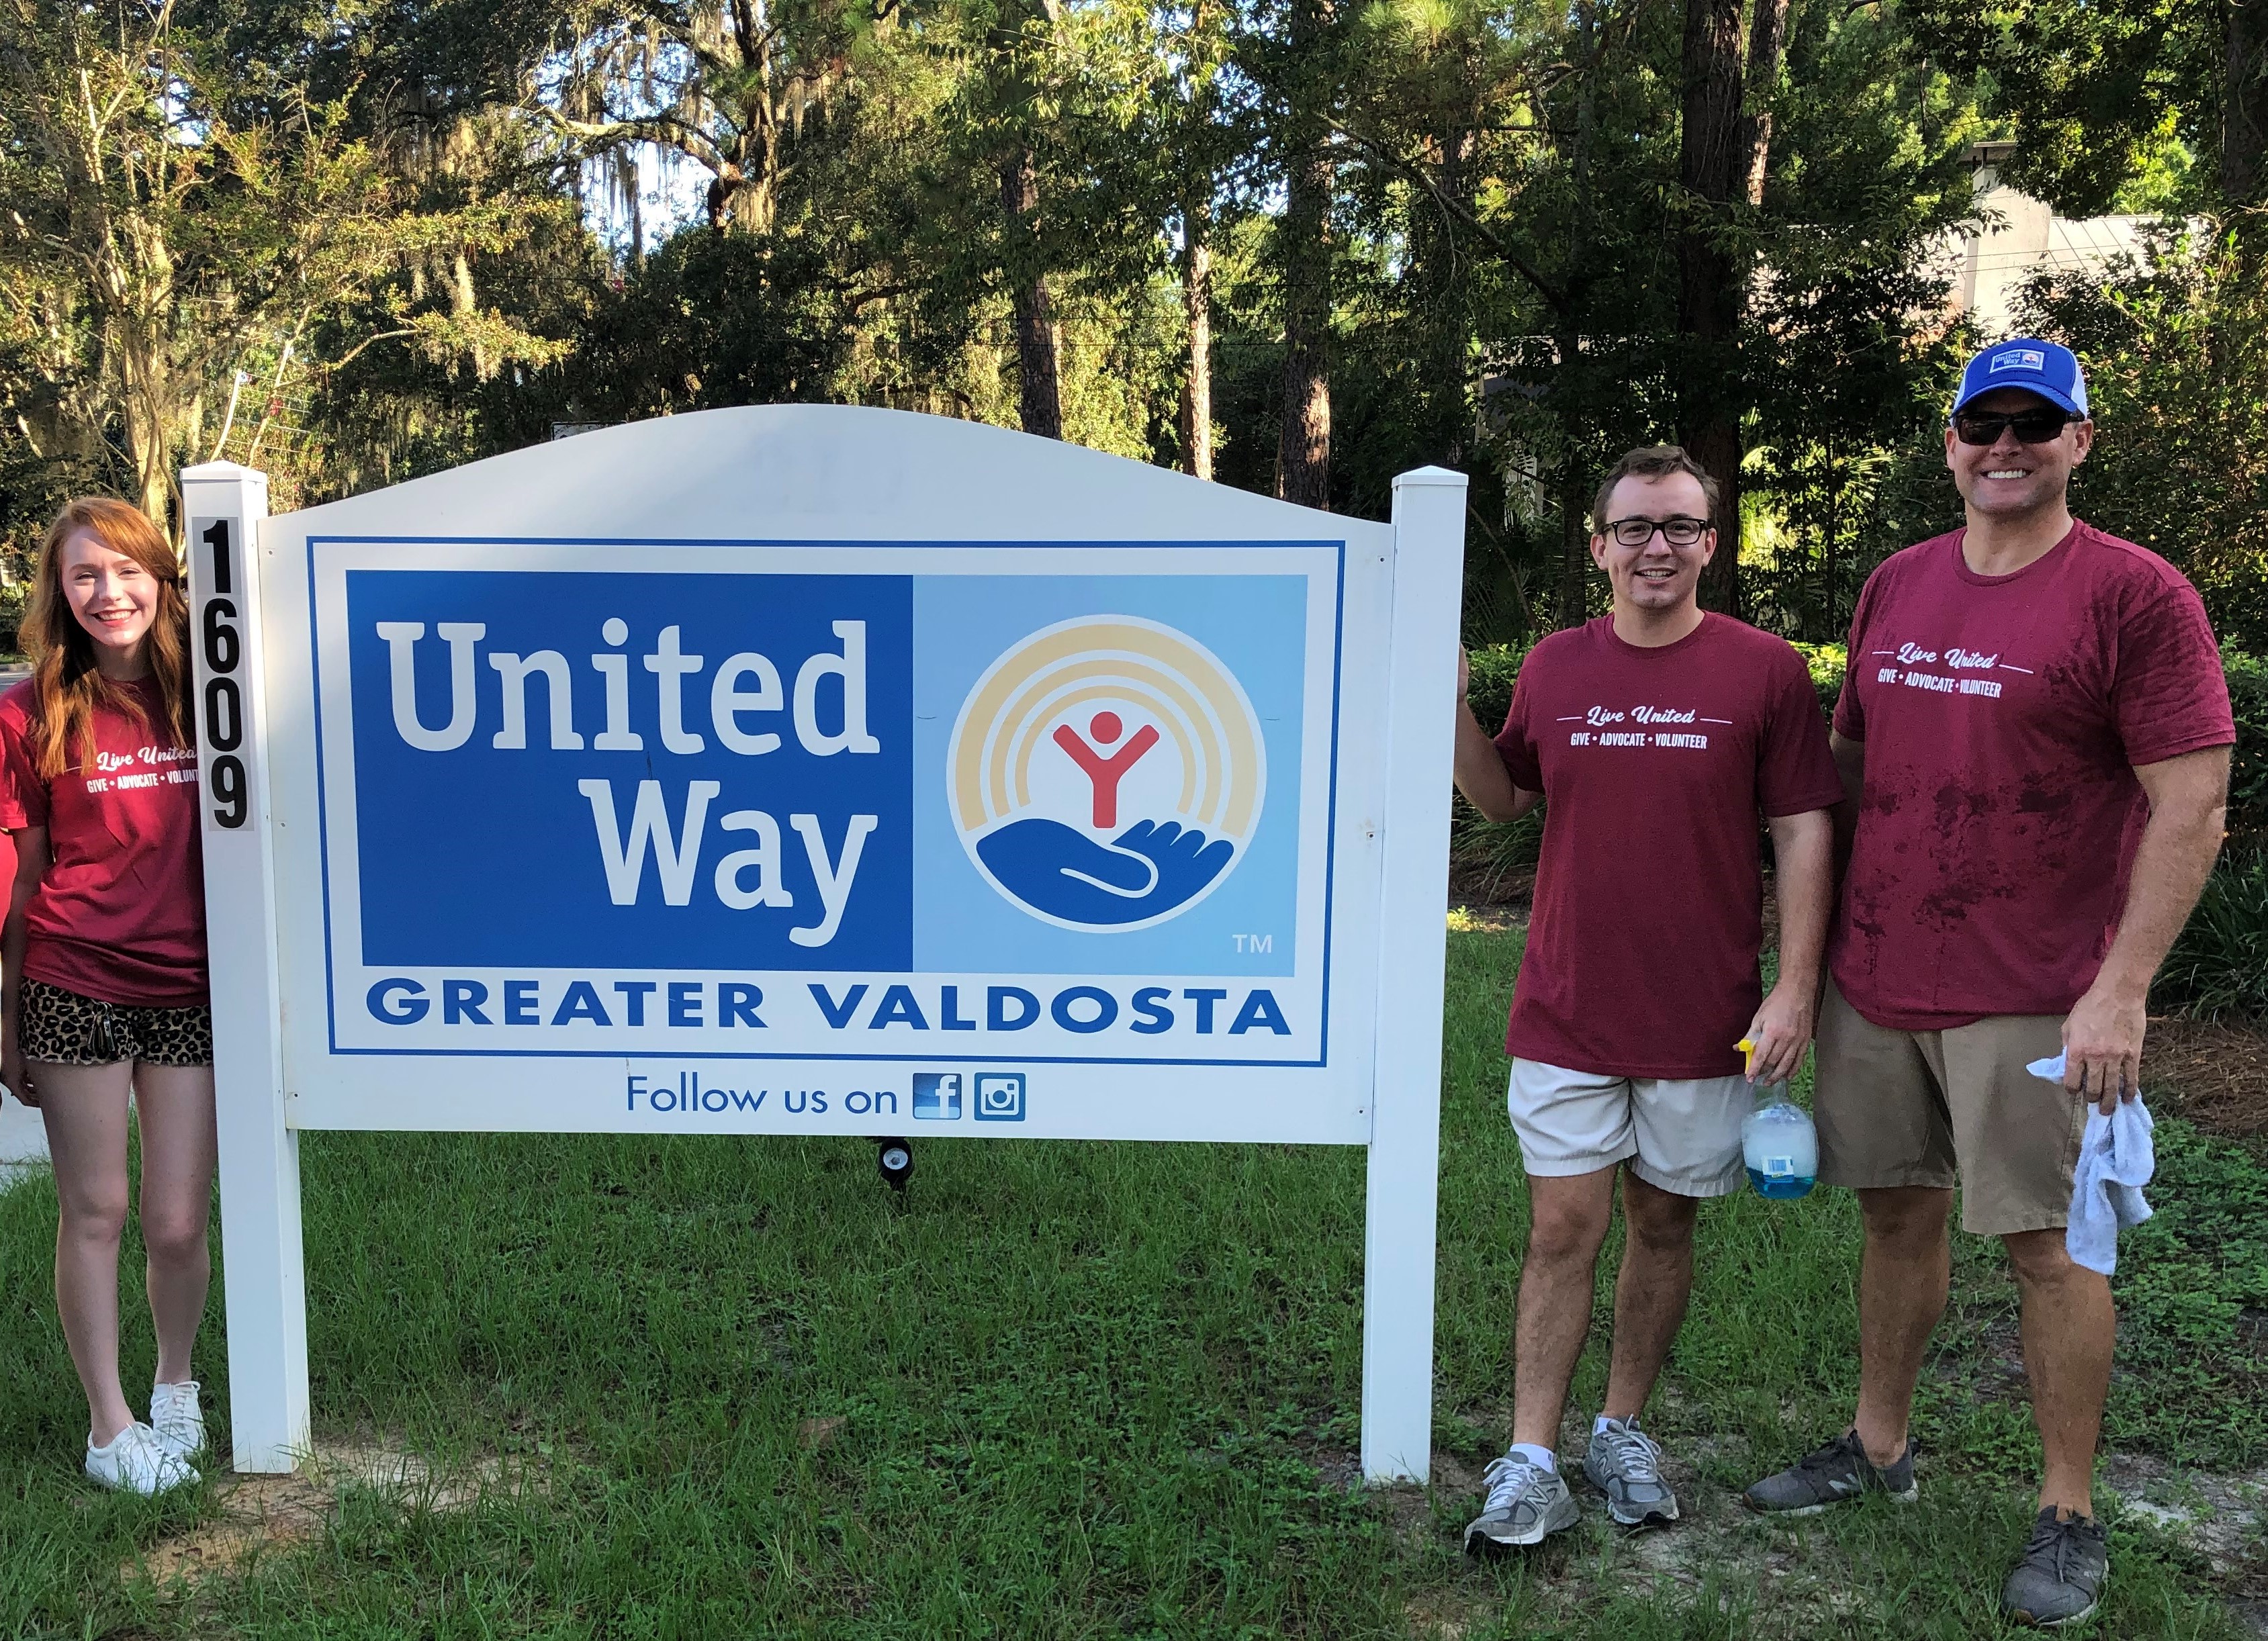 Coleman Talley participated in the 2019 Greater Valdosta Untied Way Day of Caring